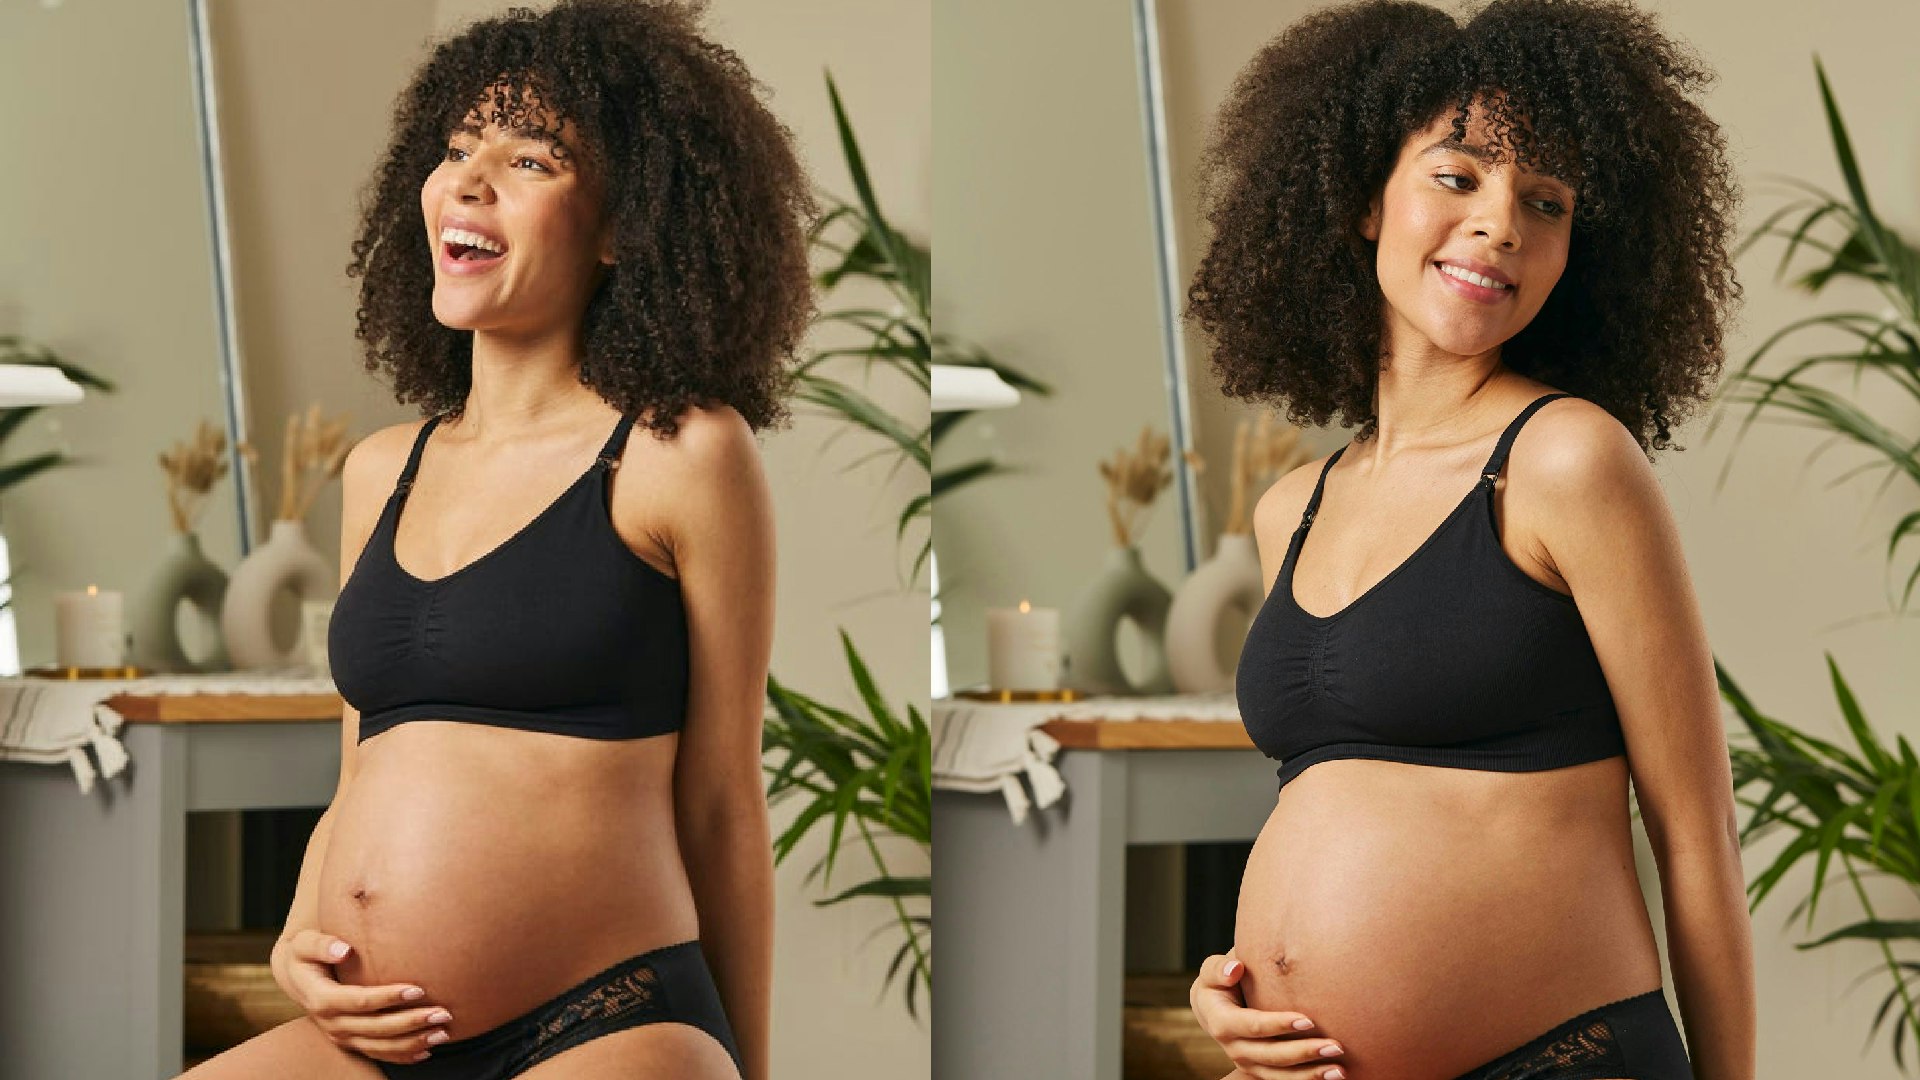 Where To Buy The Best Maternity Lingerie - For Comfort And Sexy